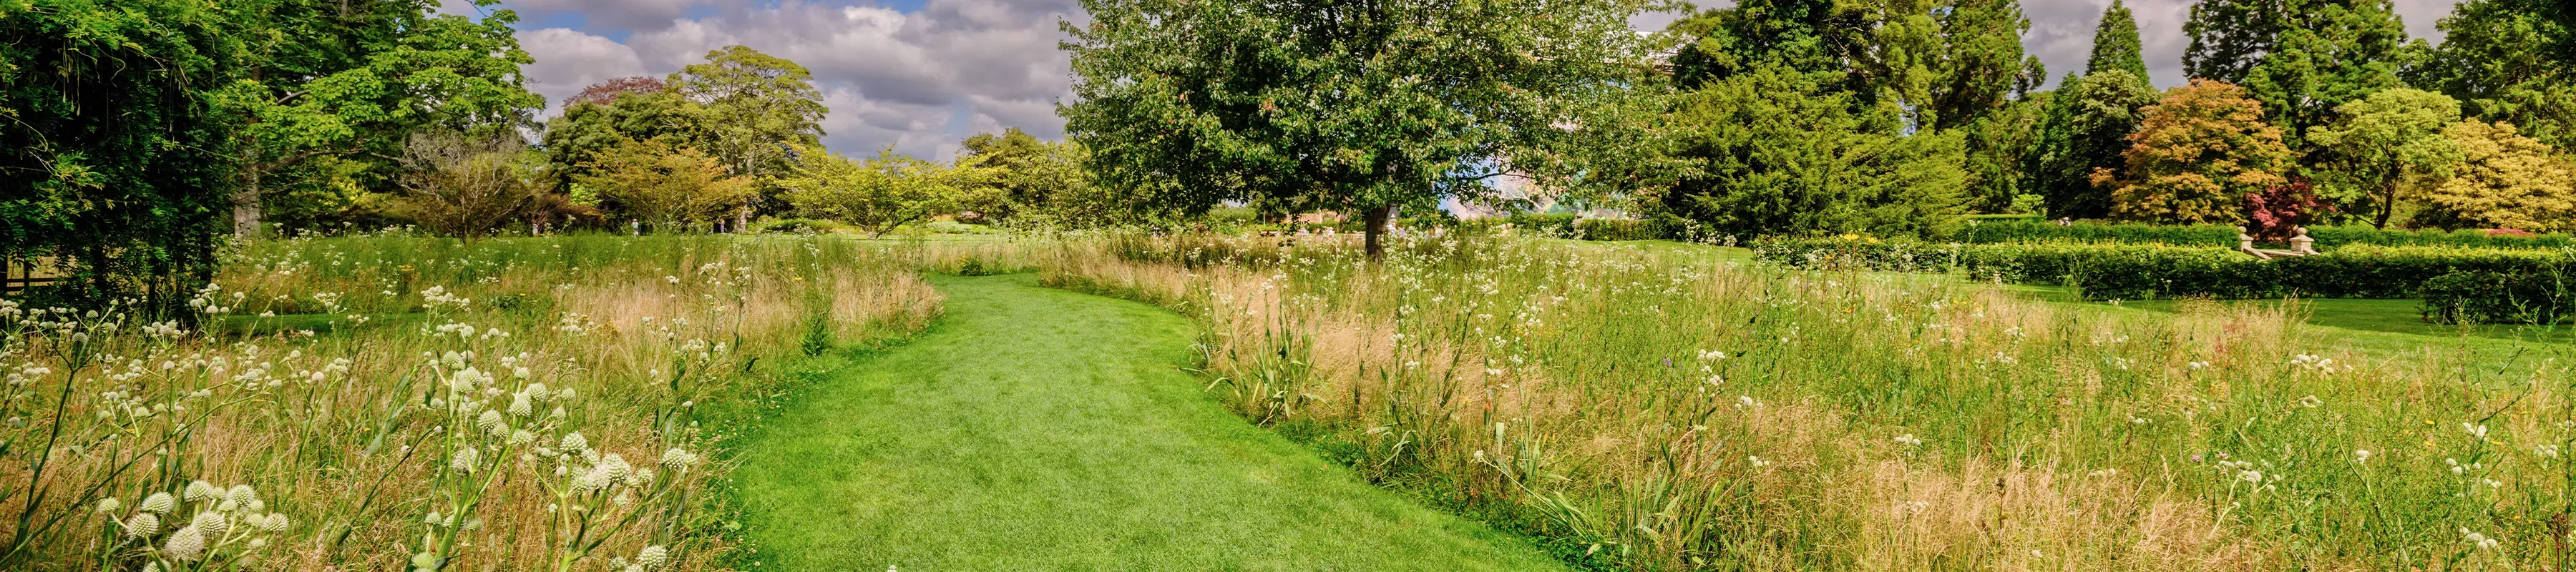 The American Prairie landscape at Wakehurst, a grass path through beds with tall plants. 